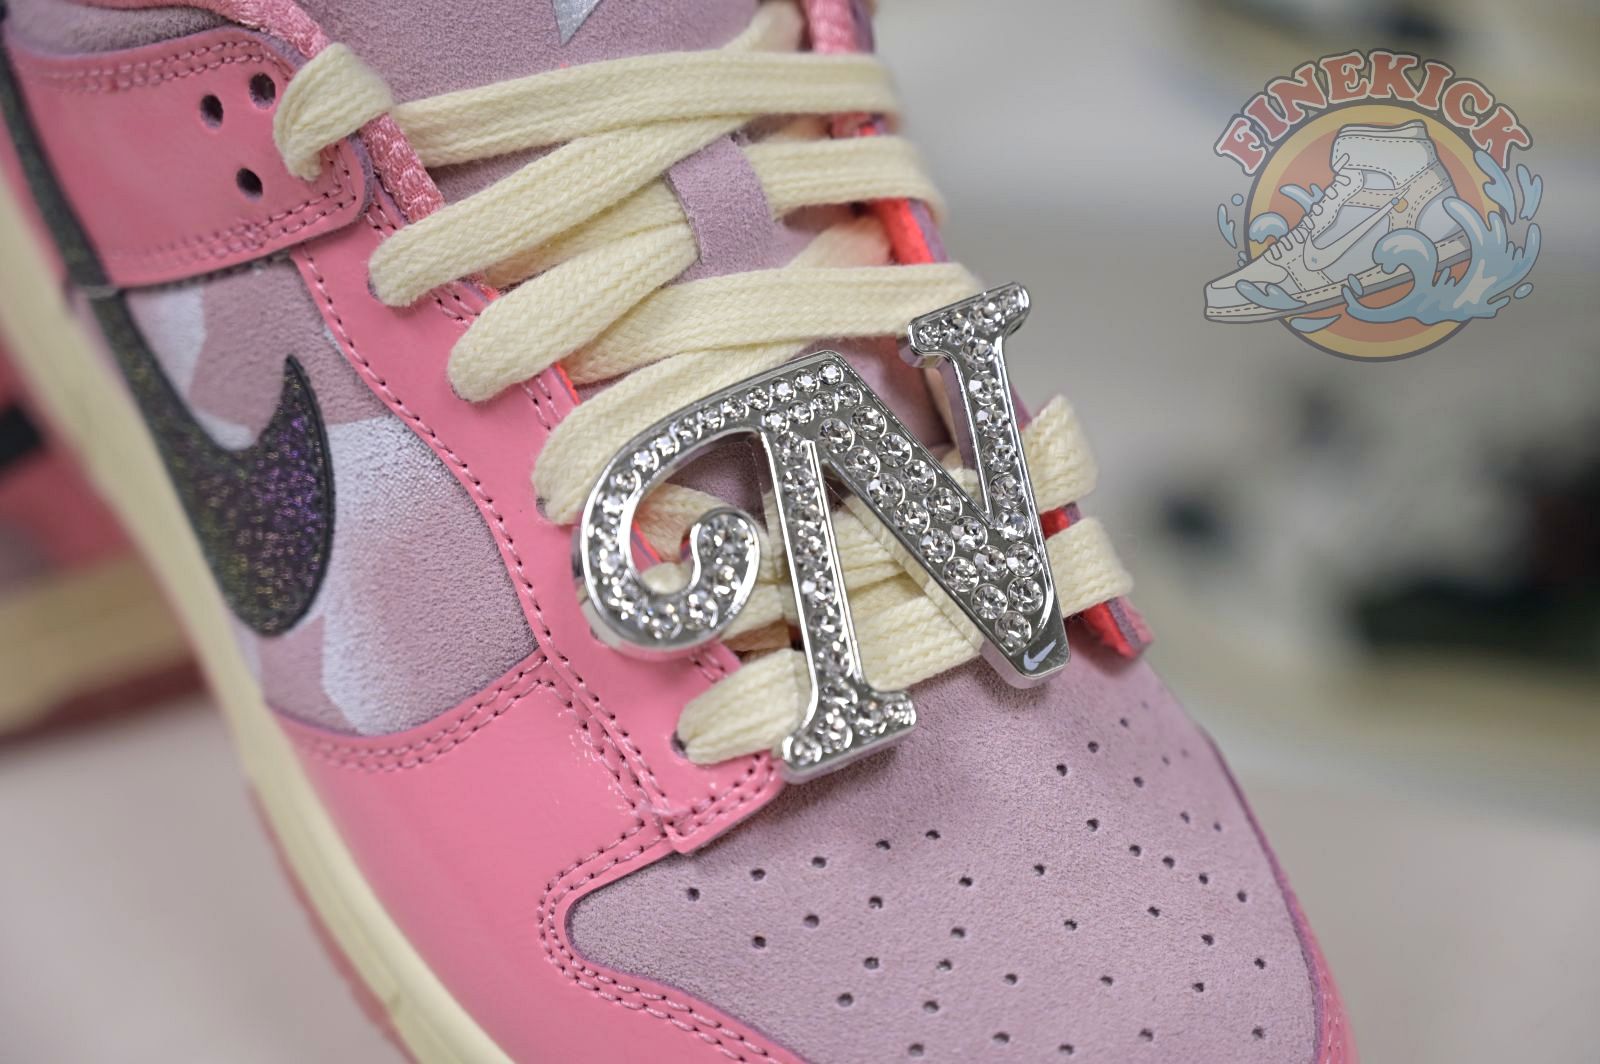 Nike Dunk Low"Hot Punch and PinkFoam" barbie